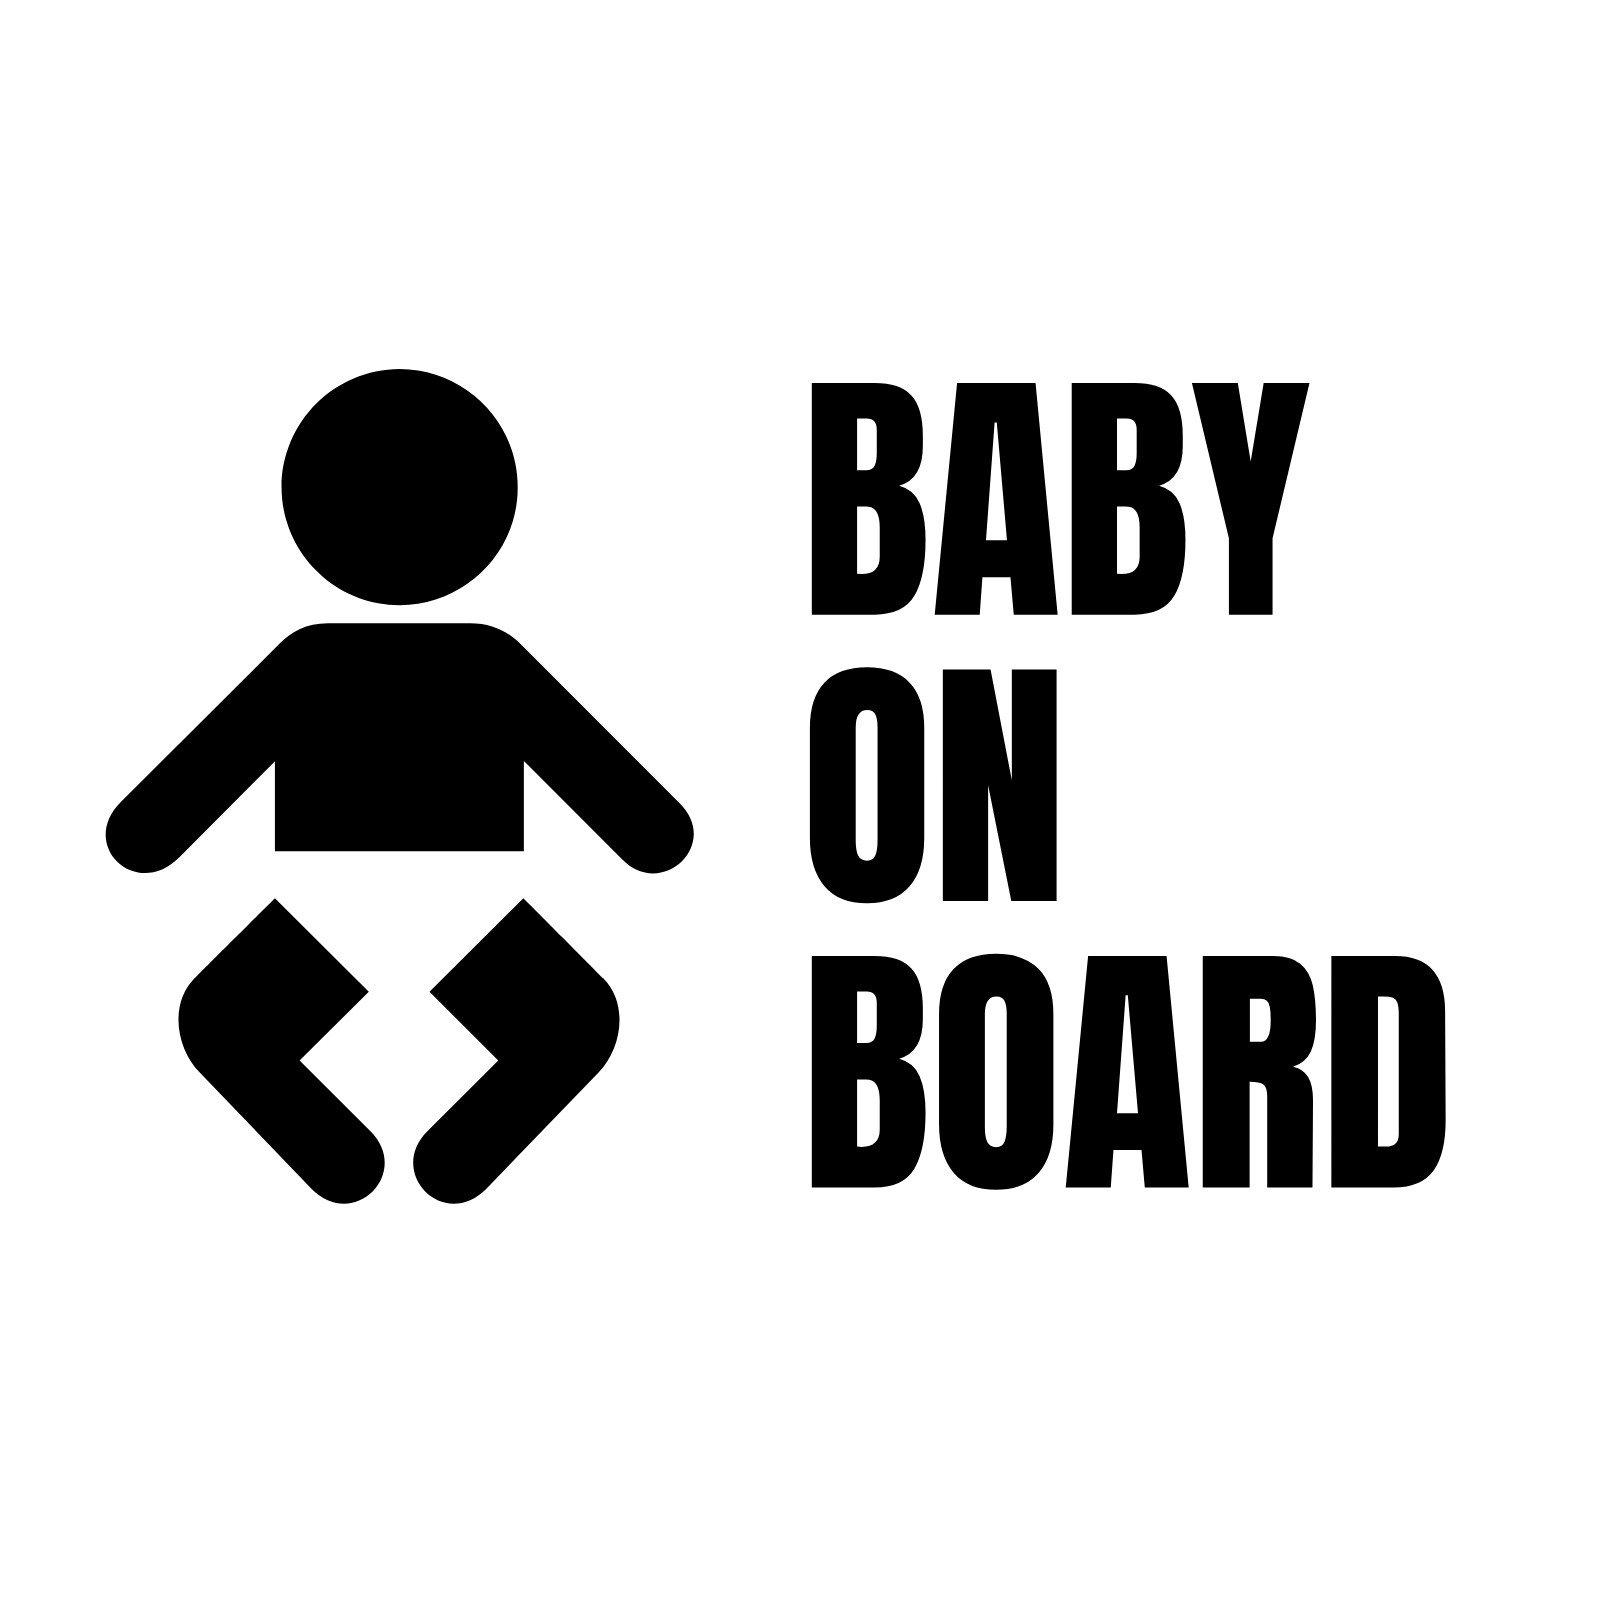 Baby on Board Car Sticker Decal Black and White 